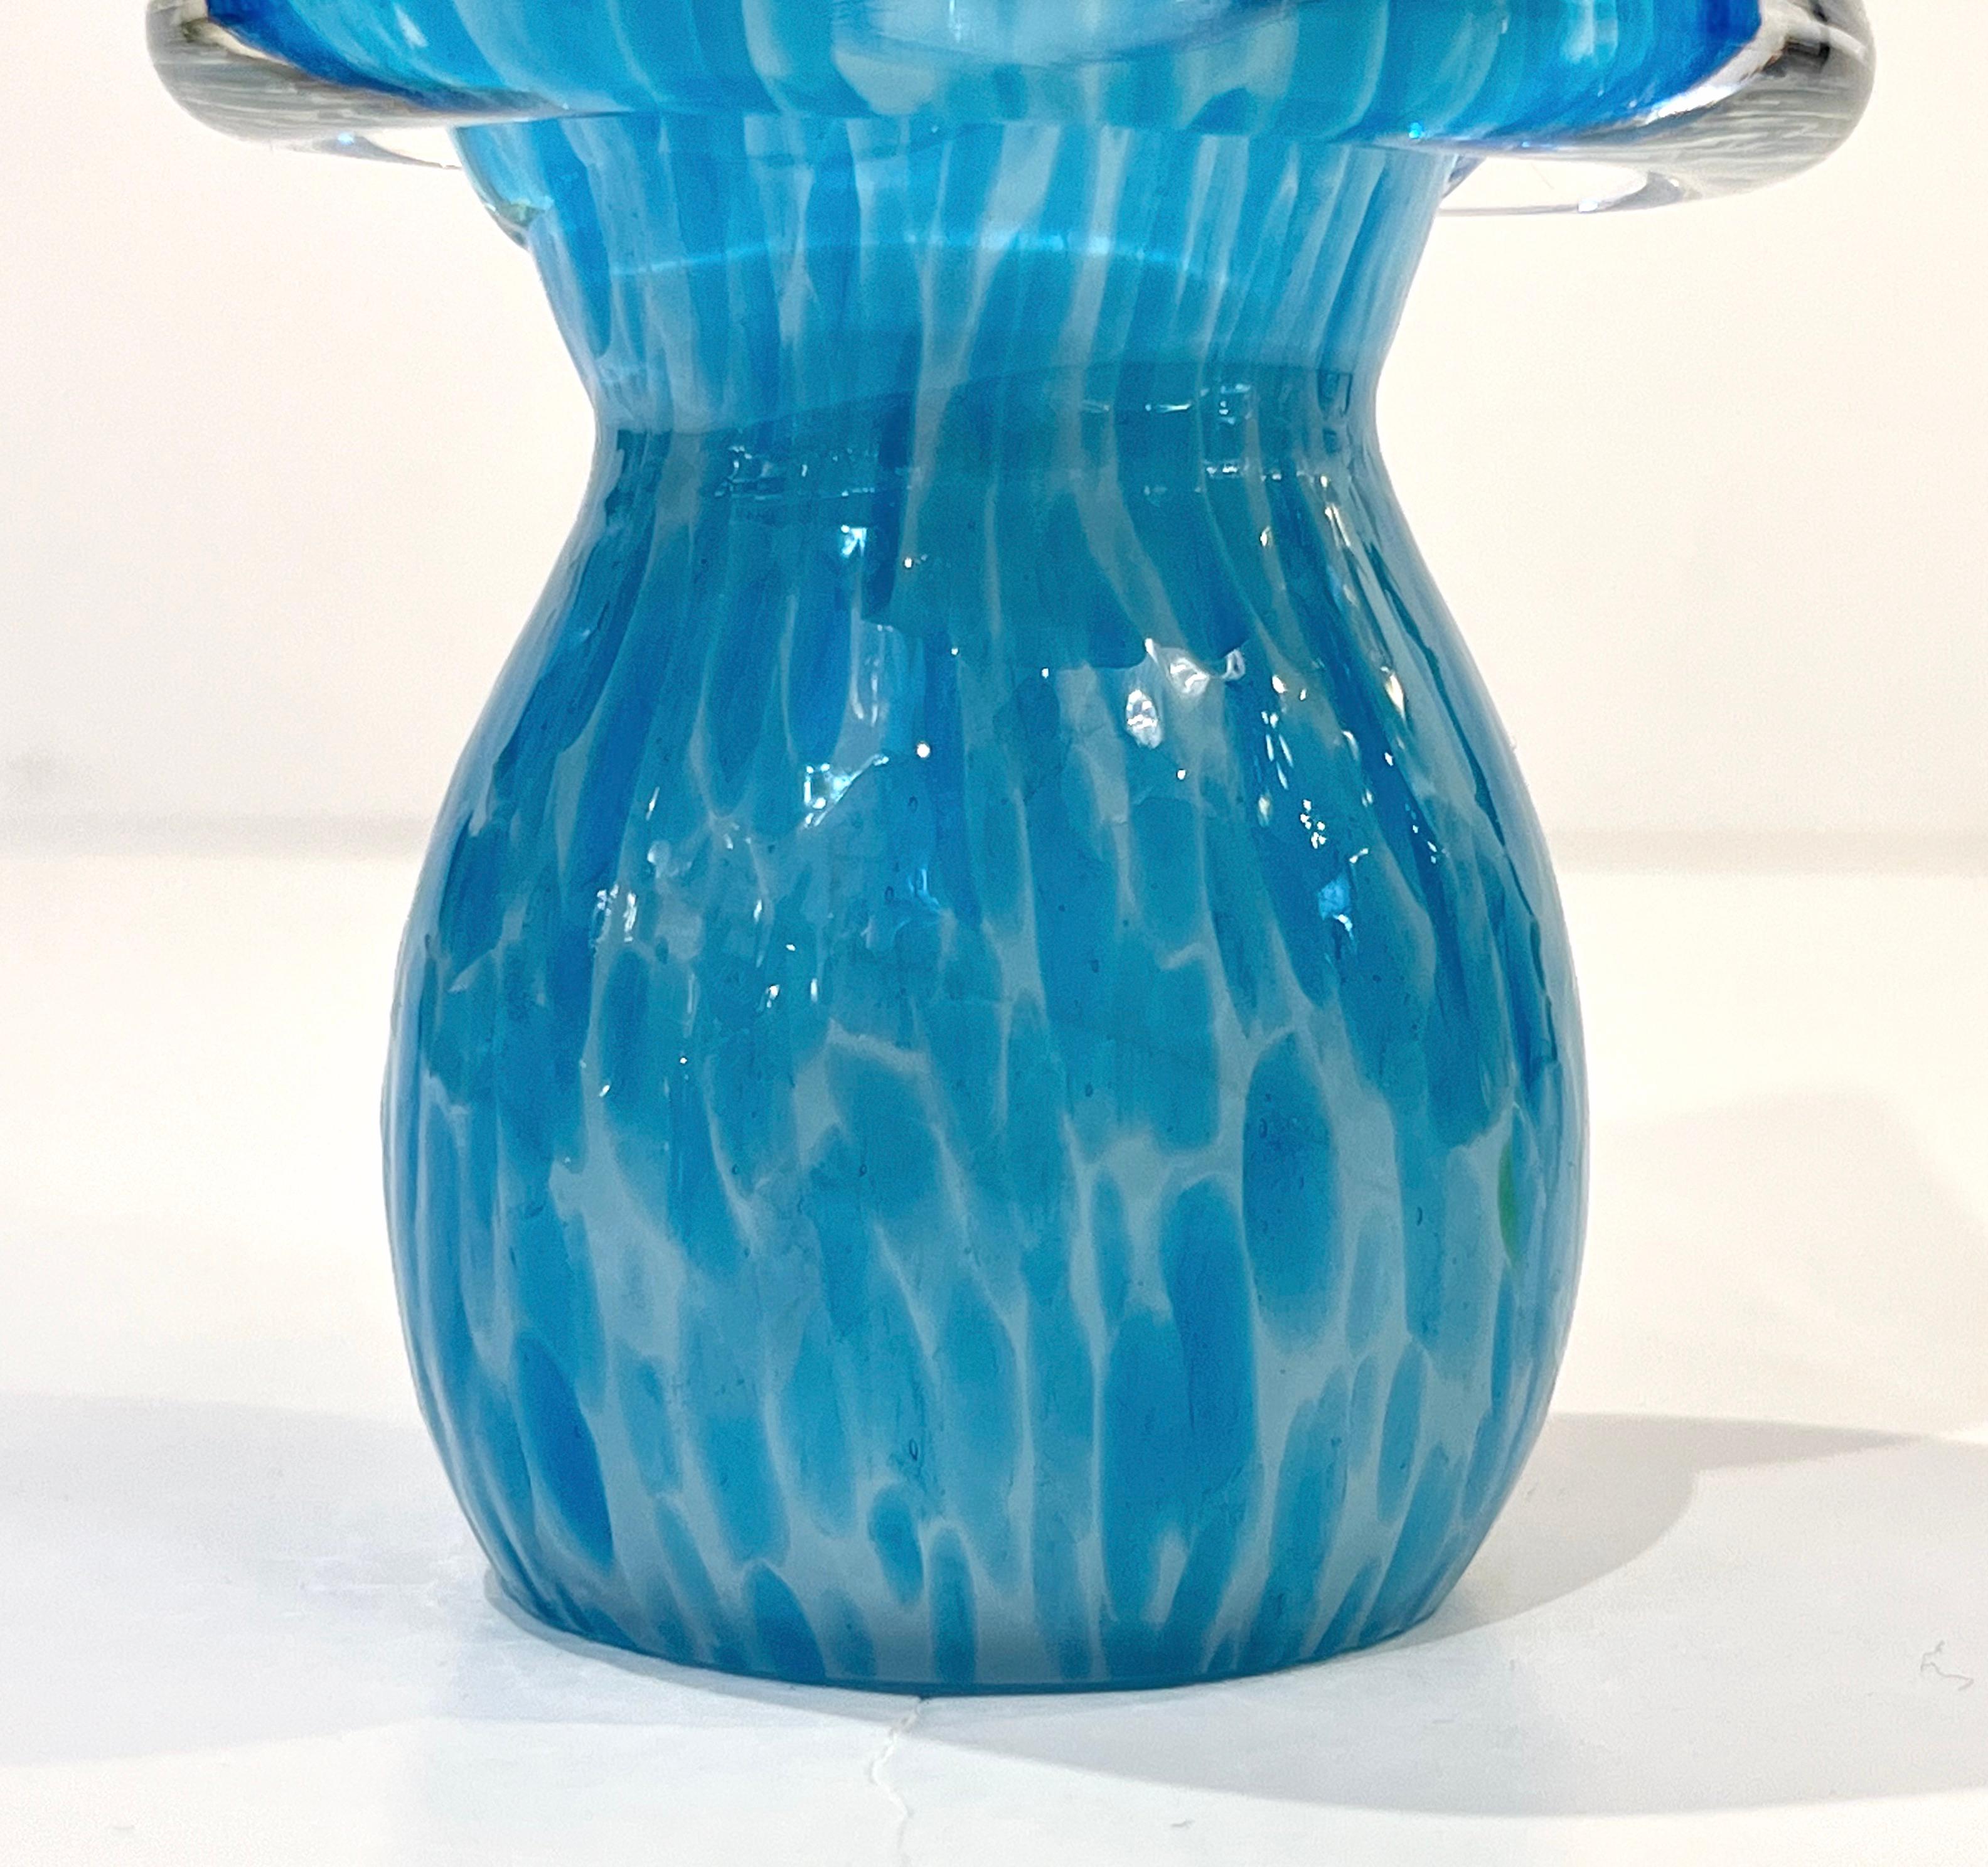 Formia 1980s Italian Vintage Turquoise Blue & White Murano Glass Tree Sculpture For Sale 2